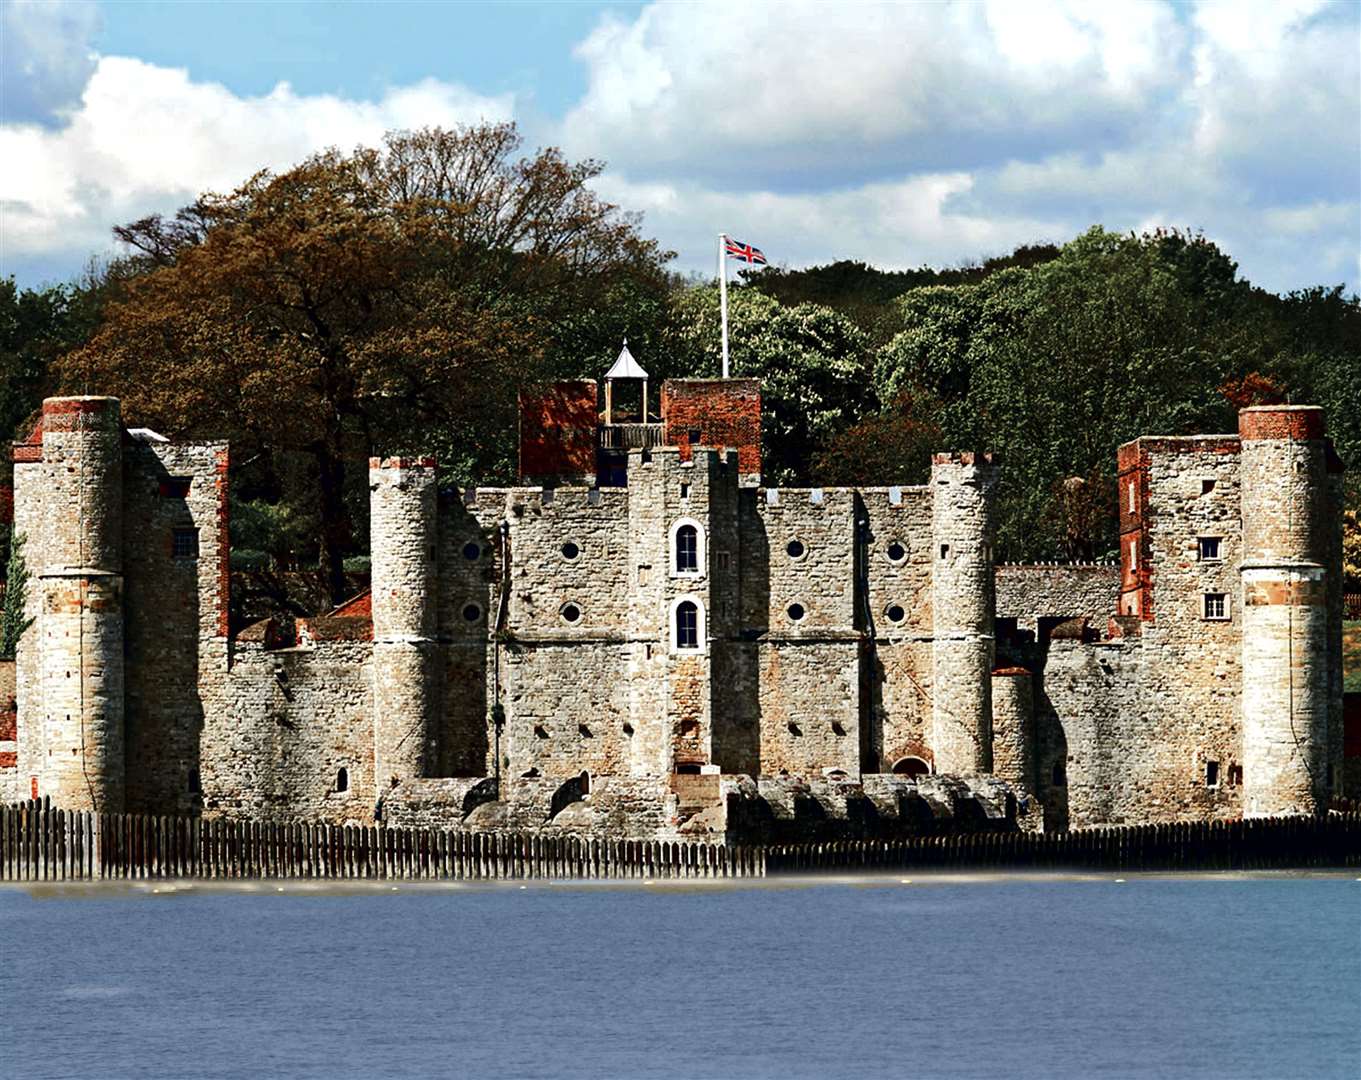 Take in the 16th-century Upnor Castle on this walk along the River Medway